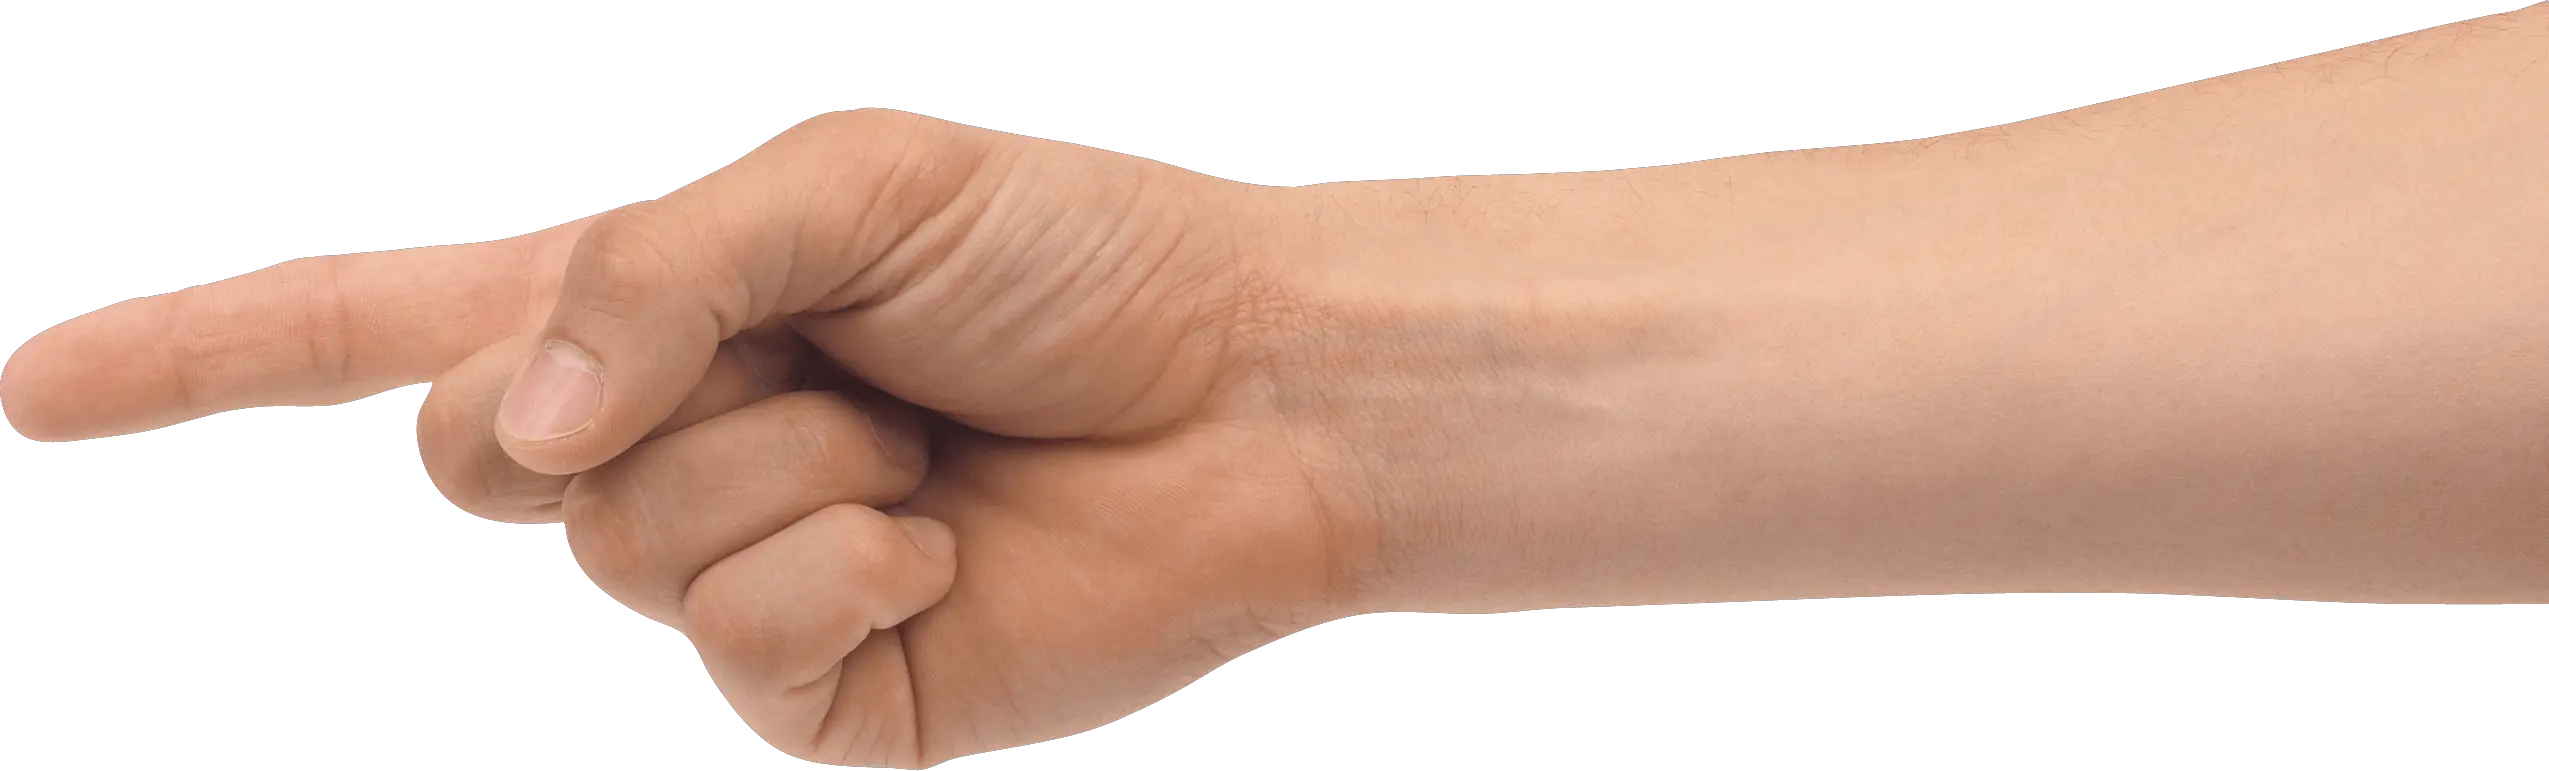 Dirty Hands Png